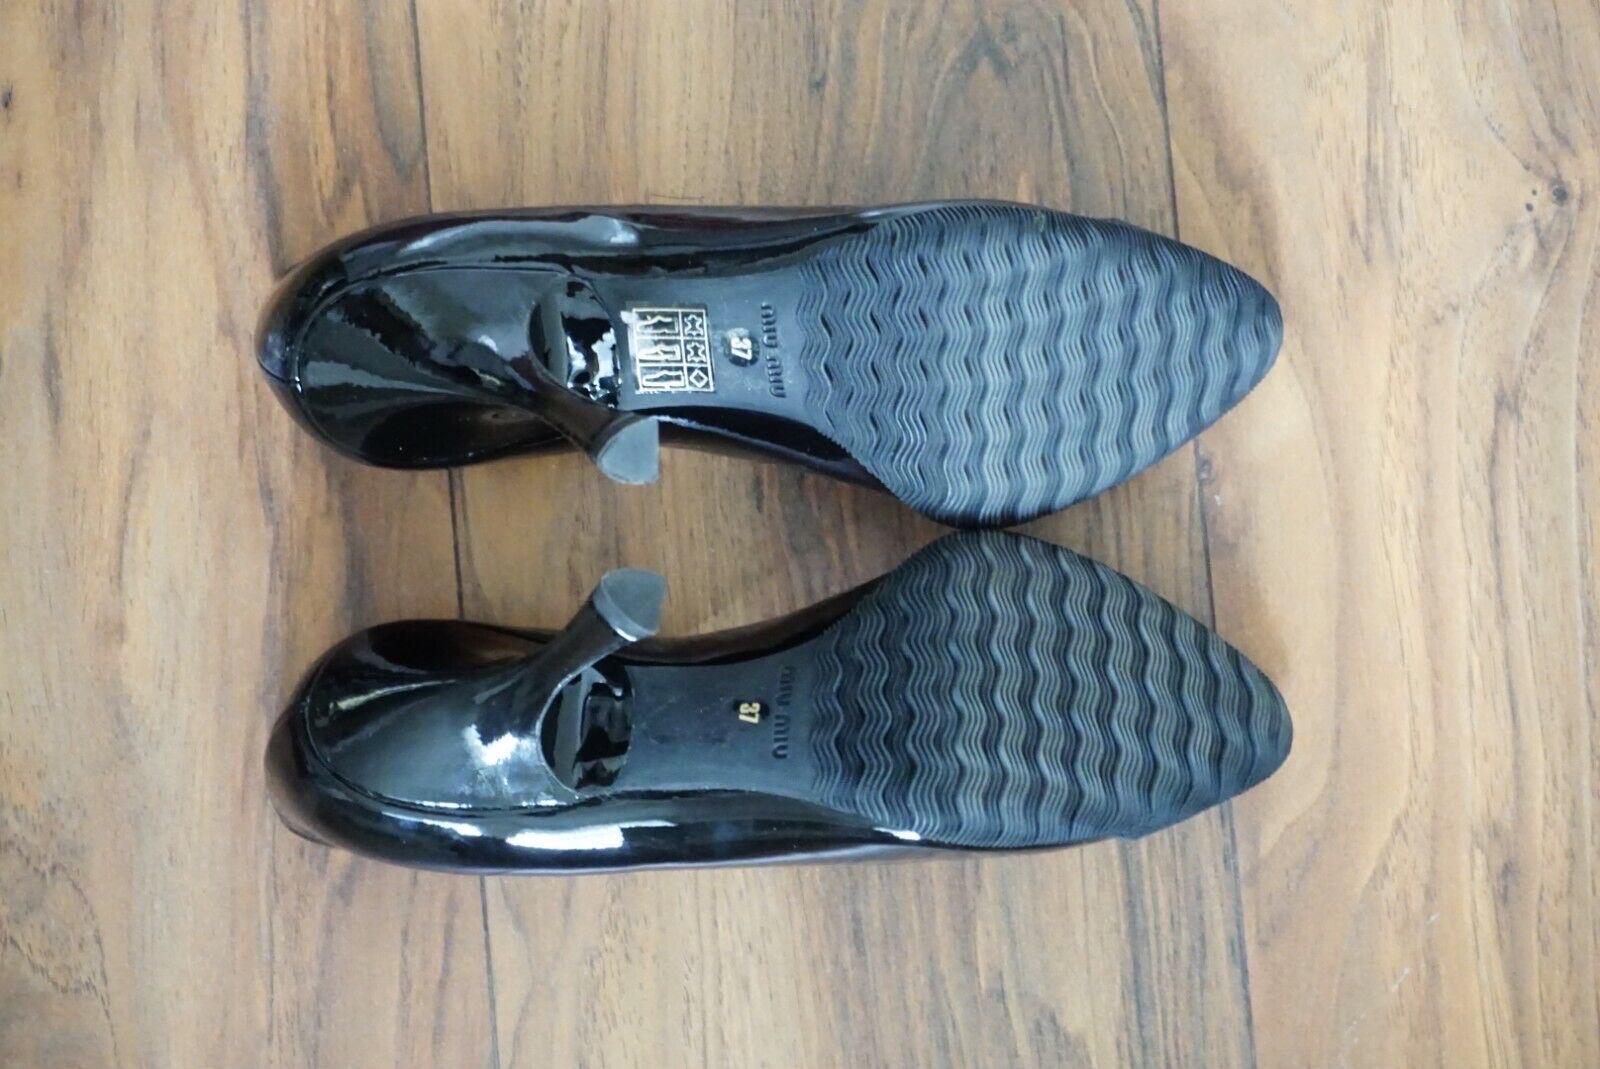 Miu Miu Vernice Patent Leather Pointed Heels Rubber Grip Soles Black 37.5 BNWT For Sale 3